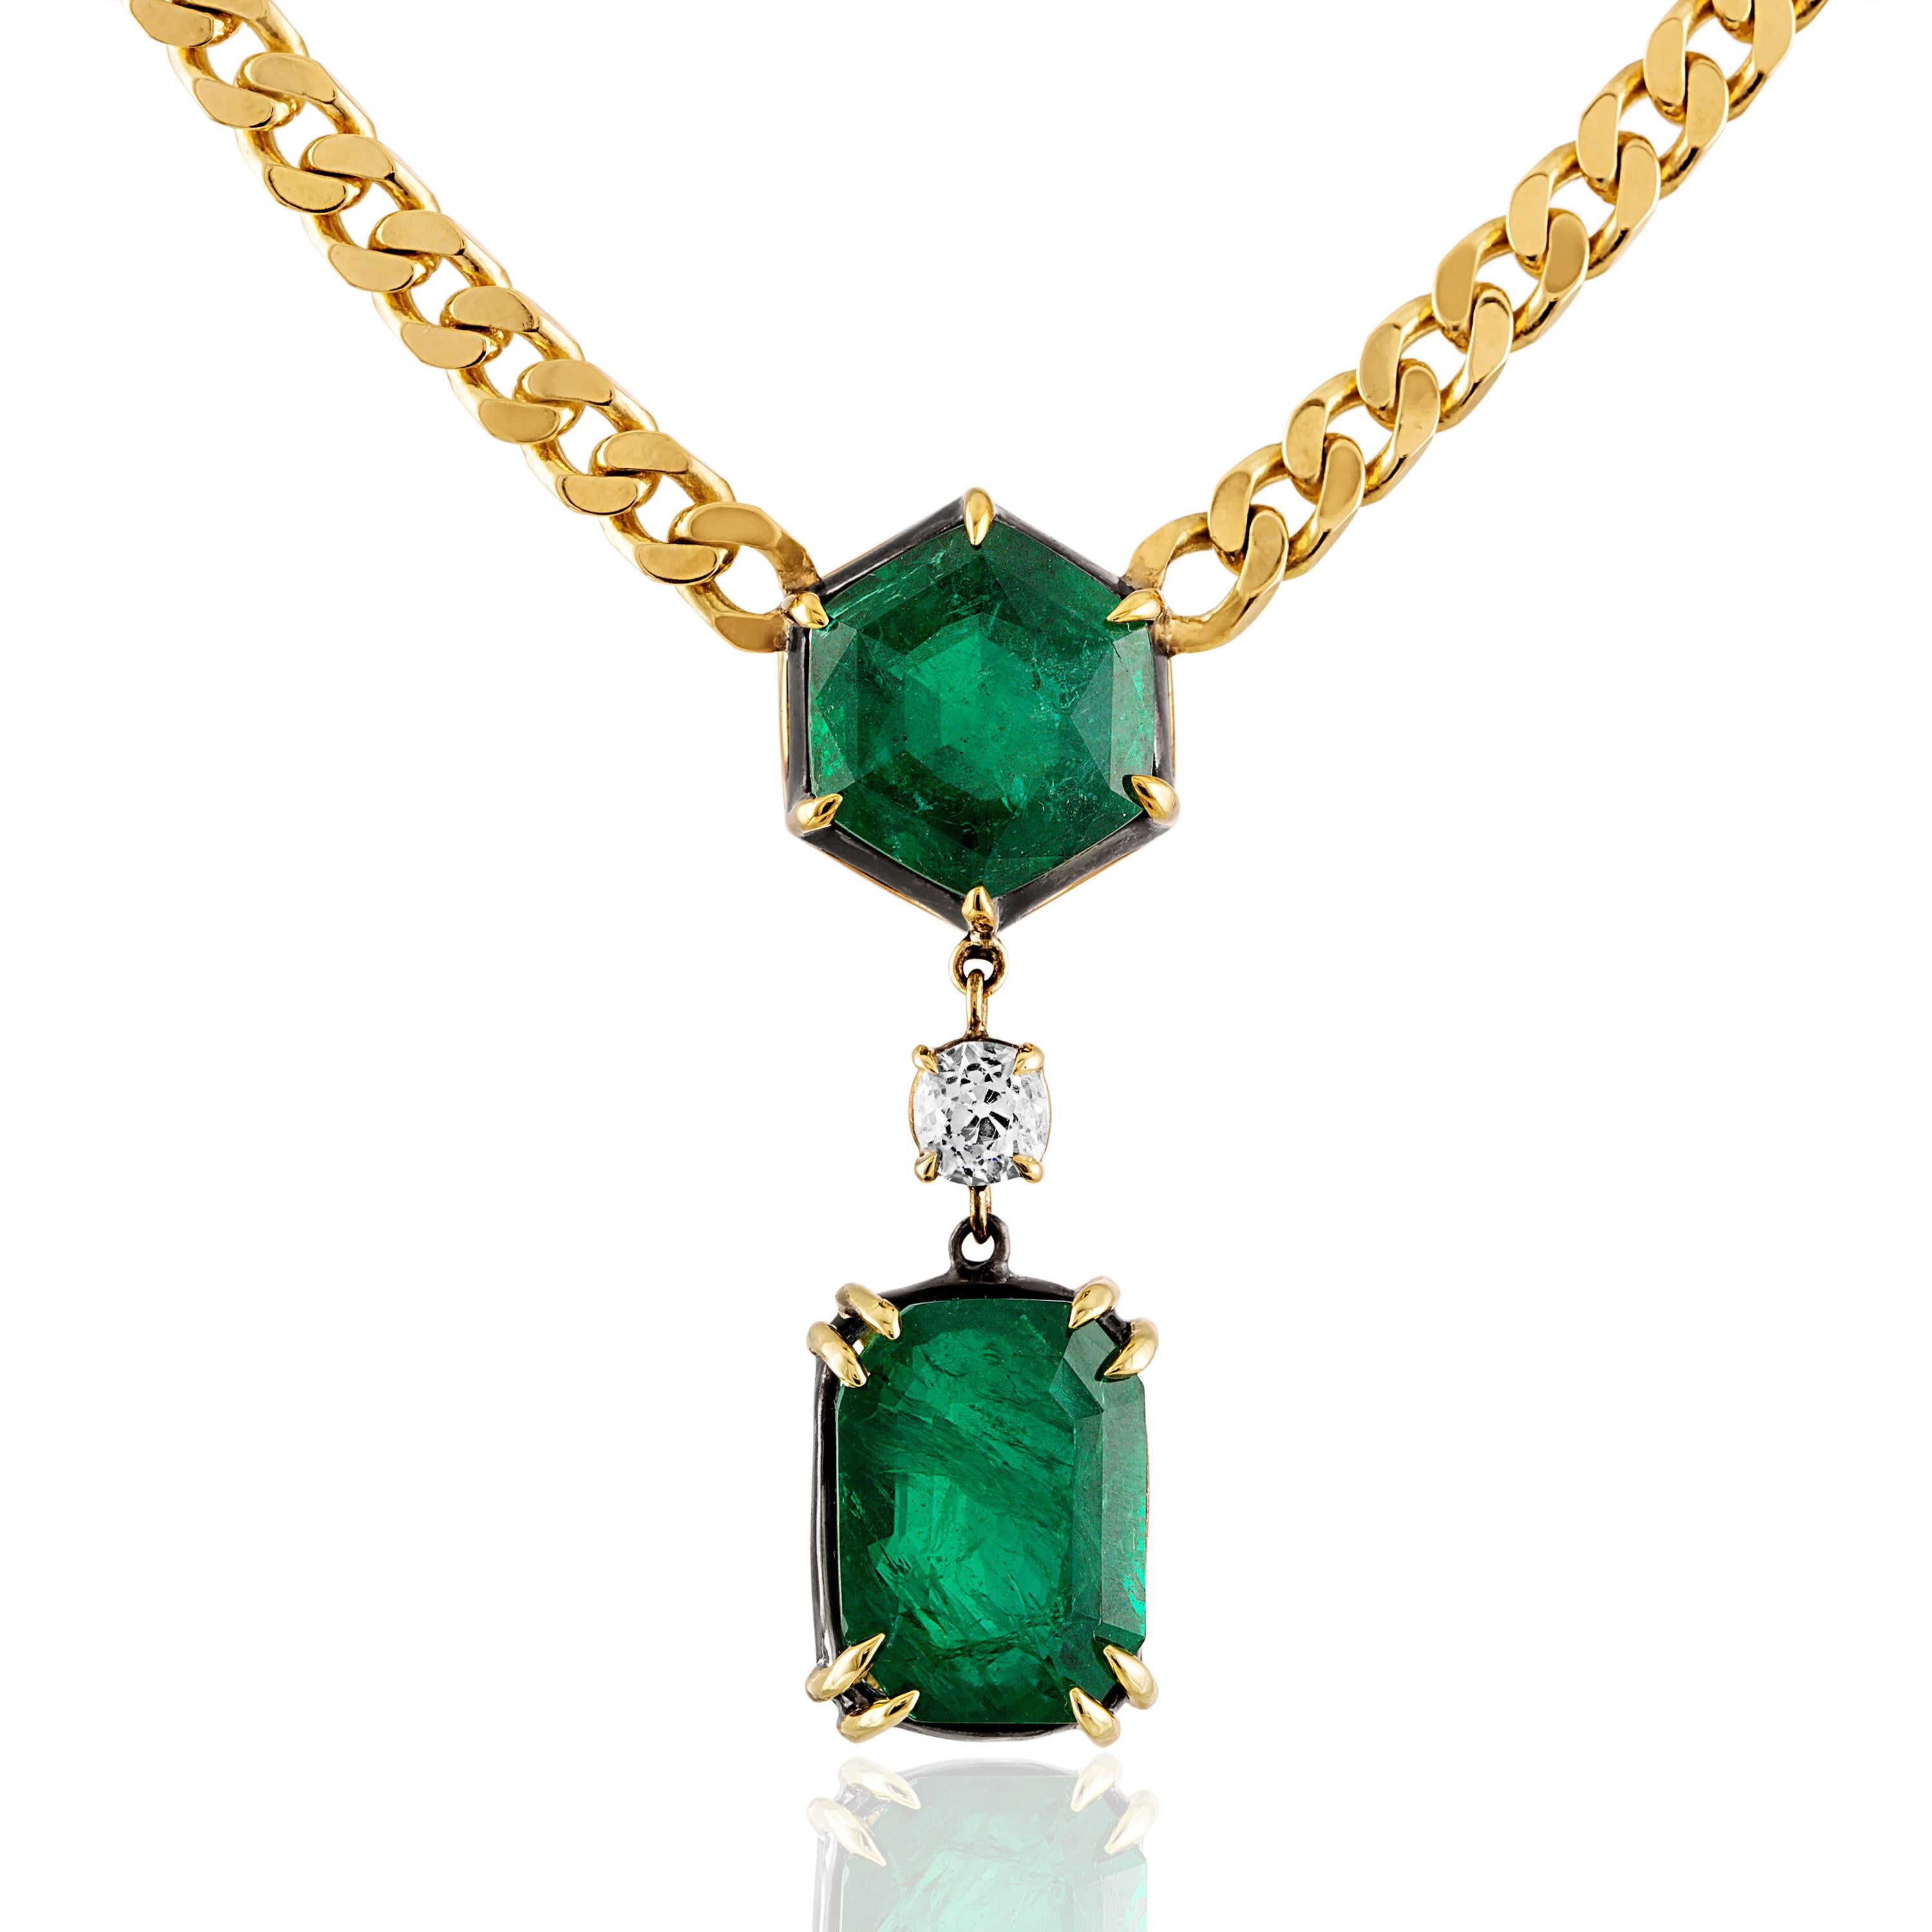 Elegant style by Mindi Mond. 
Two custom cut Zambian Emeralds 7.93 CTW & 11.27 CTW are set in 18k Gold / Silver. 0.60 center Old Cut Diamond. 1-3/4 inches long Emerald to Emerald. 18k Yellow Gold solid link chain is adjustable (2 inches extender)